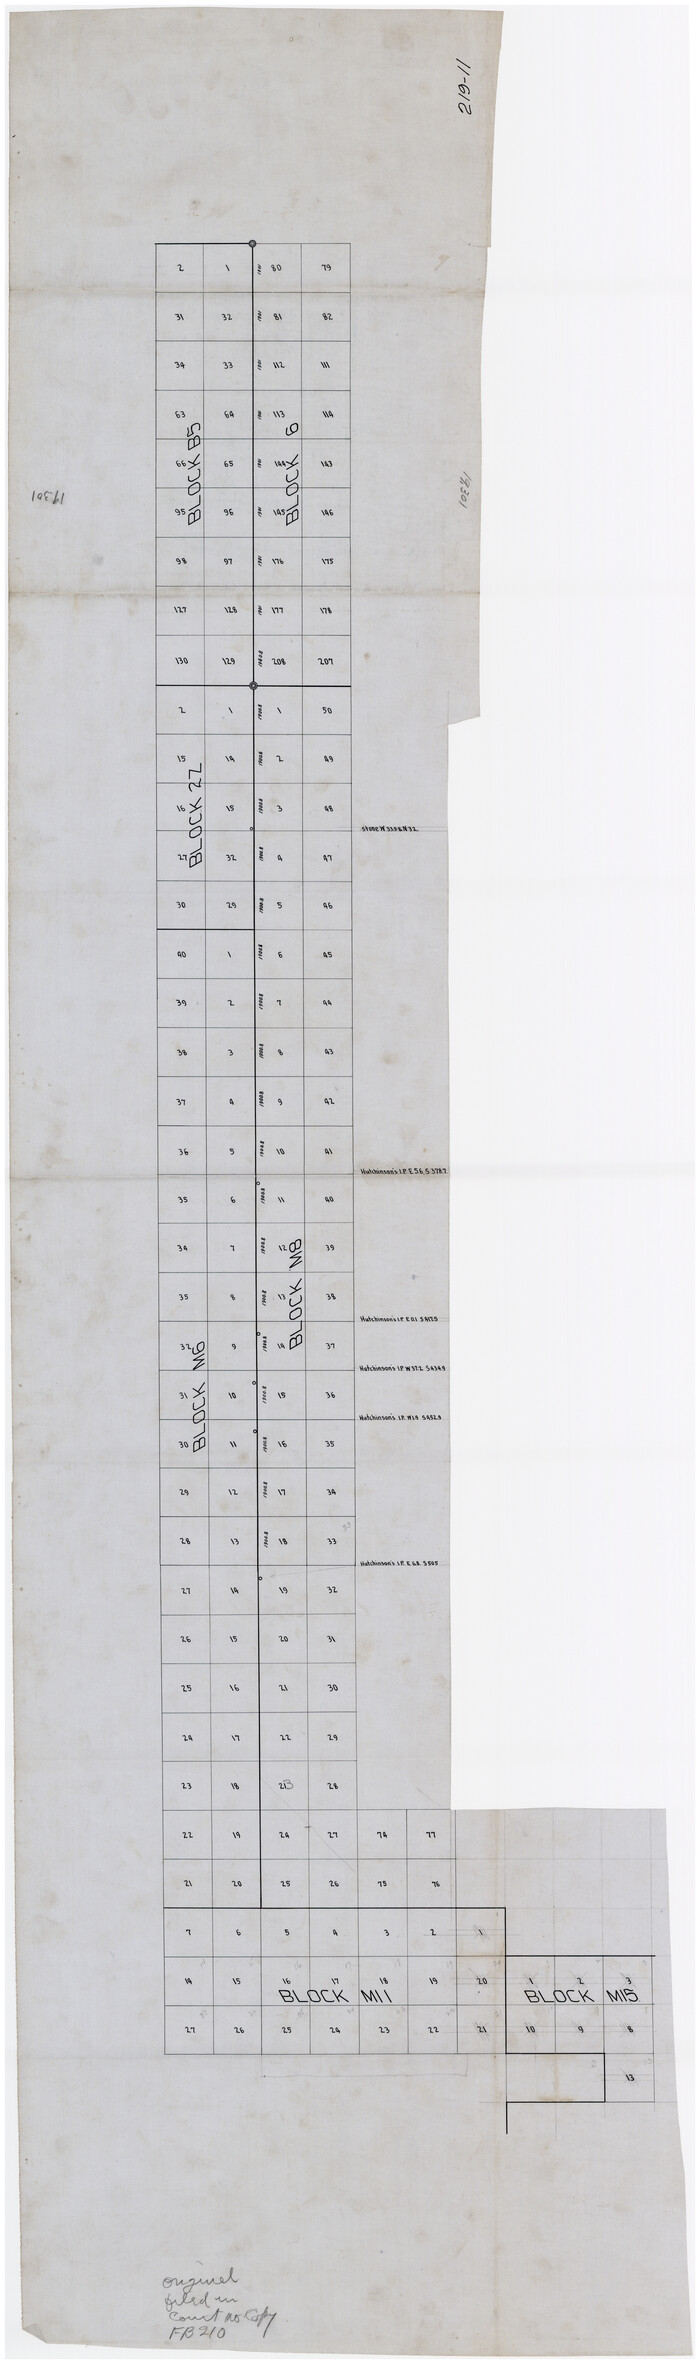 89644, [Sketch of part of Blks. B5, 6, 2Z, M6, M8, M11 and M15], Twichell Survey Records